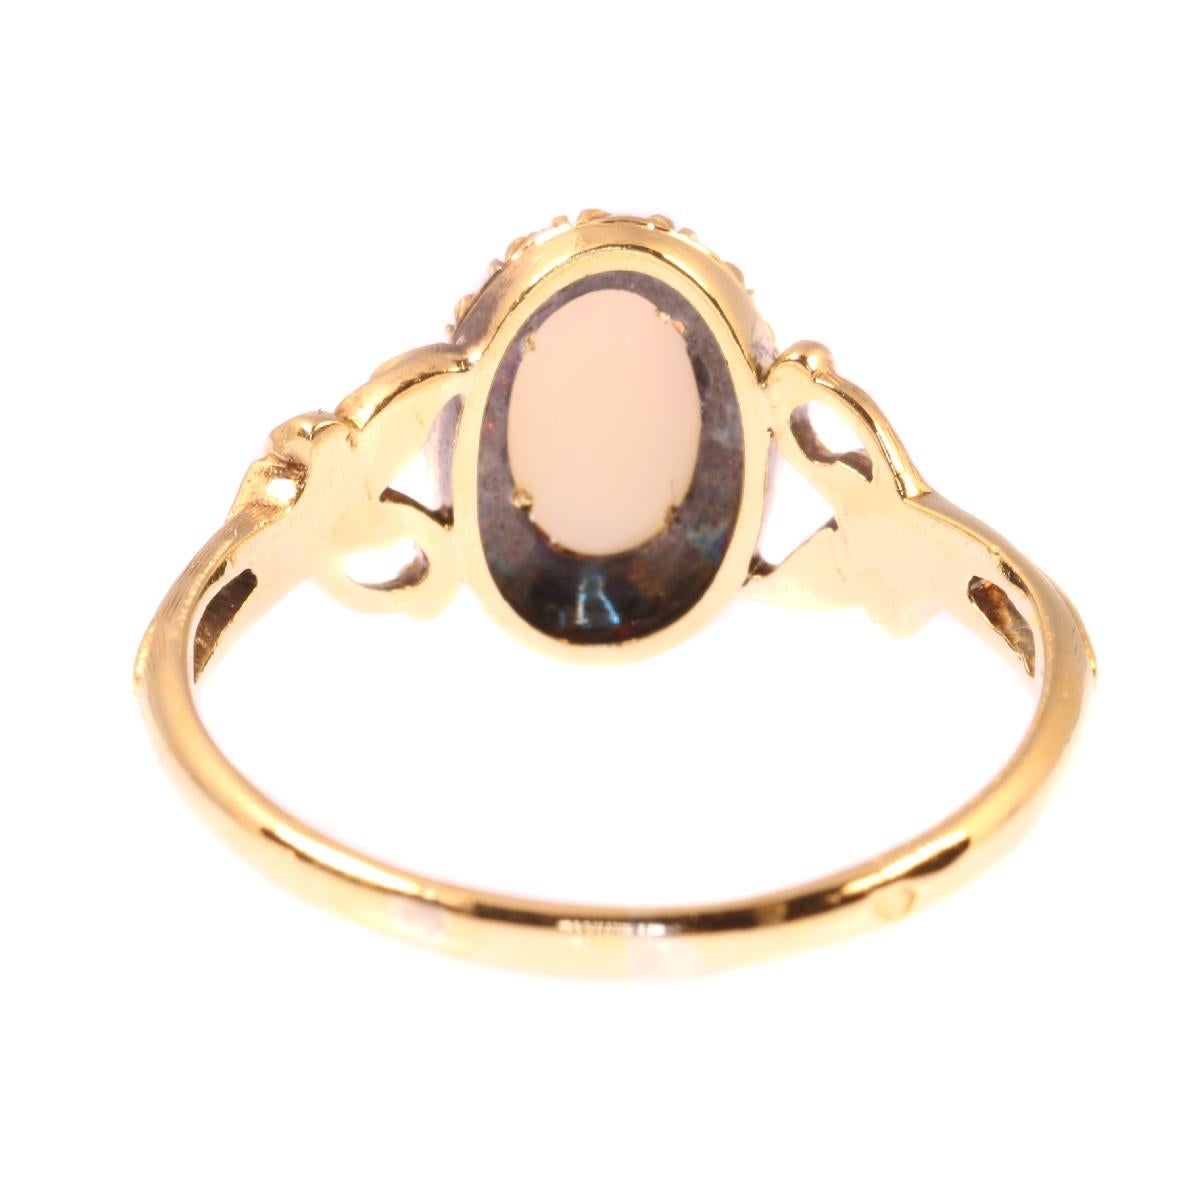 French Antique Art Nouveau Gold Ring with Diamonds and Opal 5